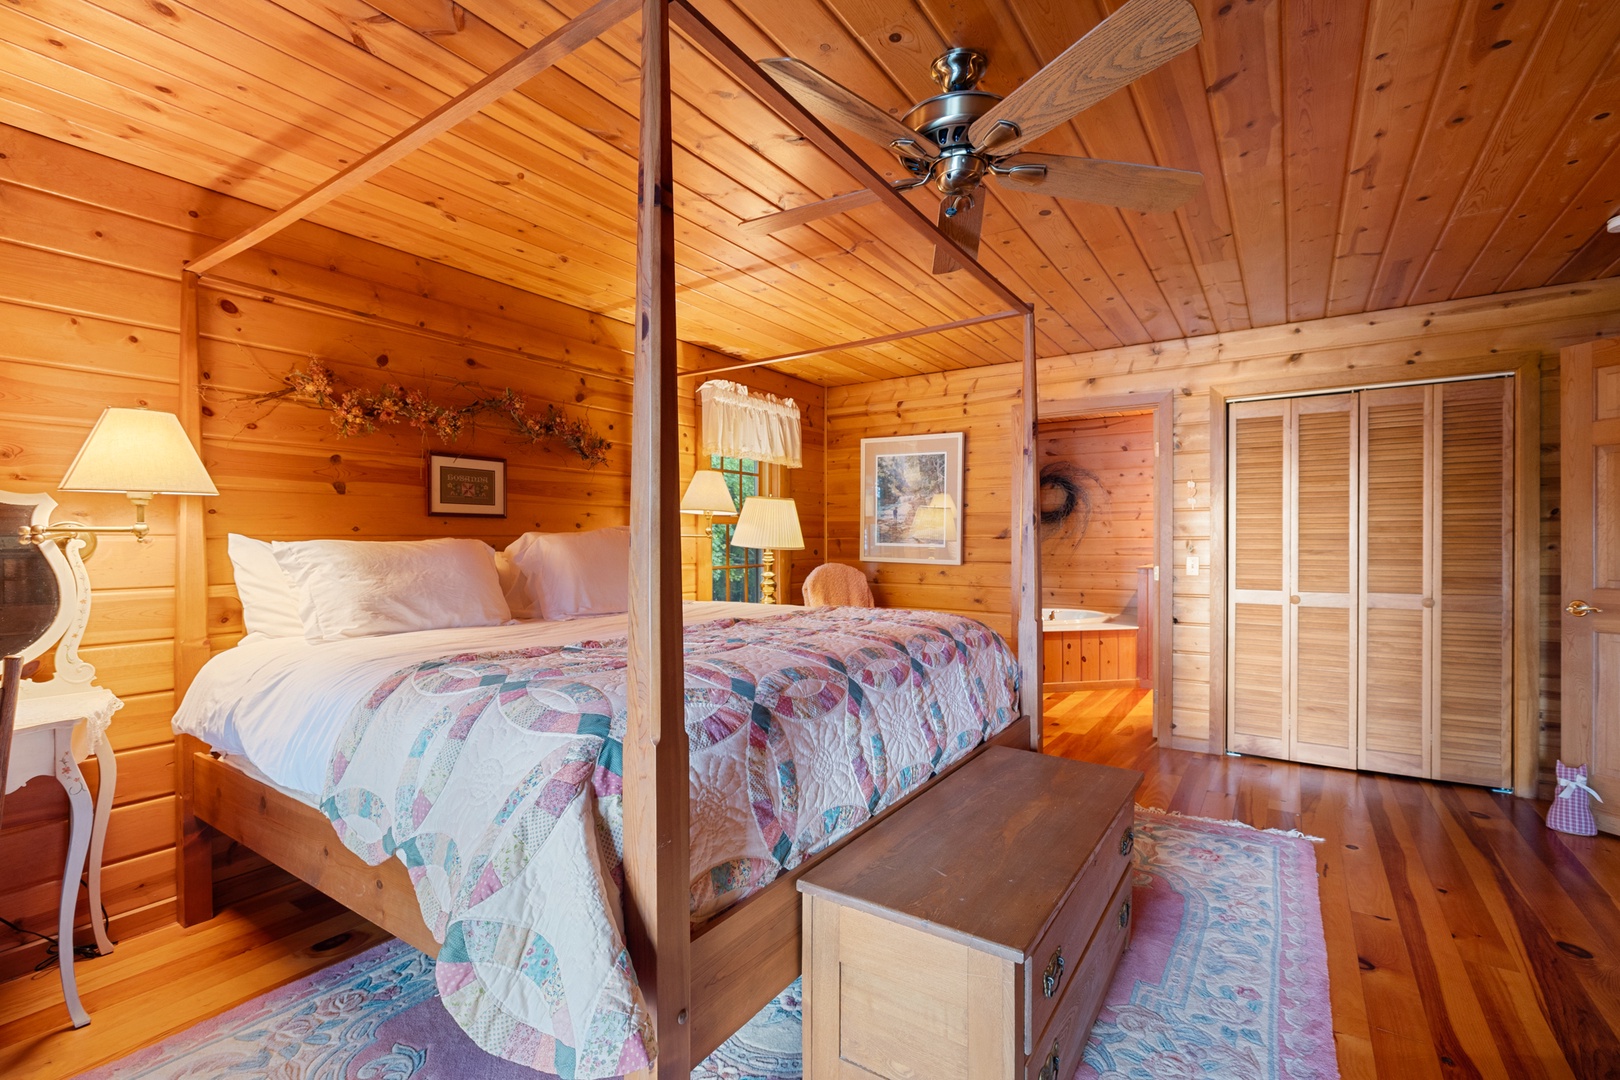 The primary bedroom offers a luxurious escape with its rustic design and ensuite bathroom.